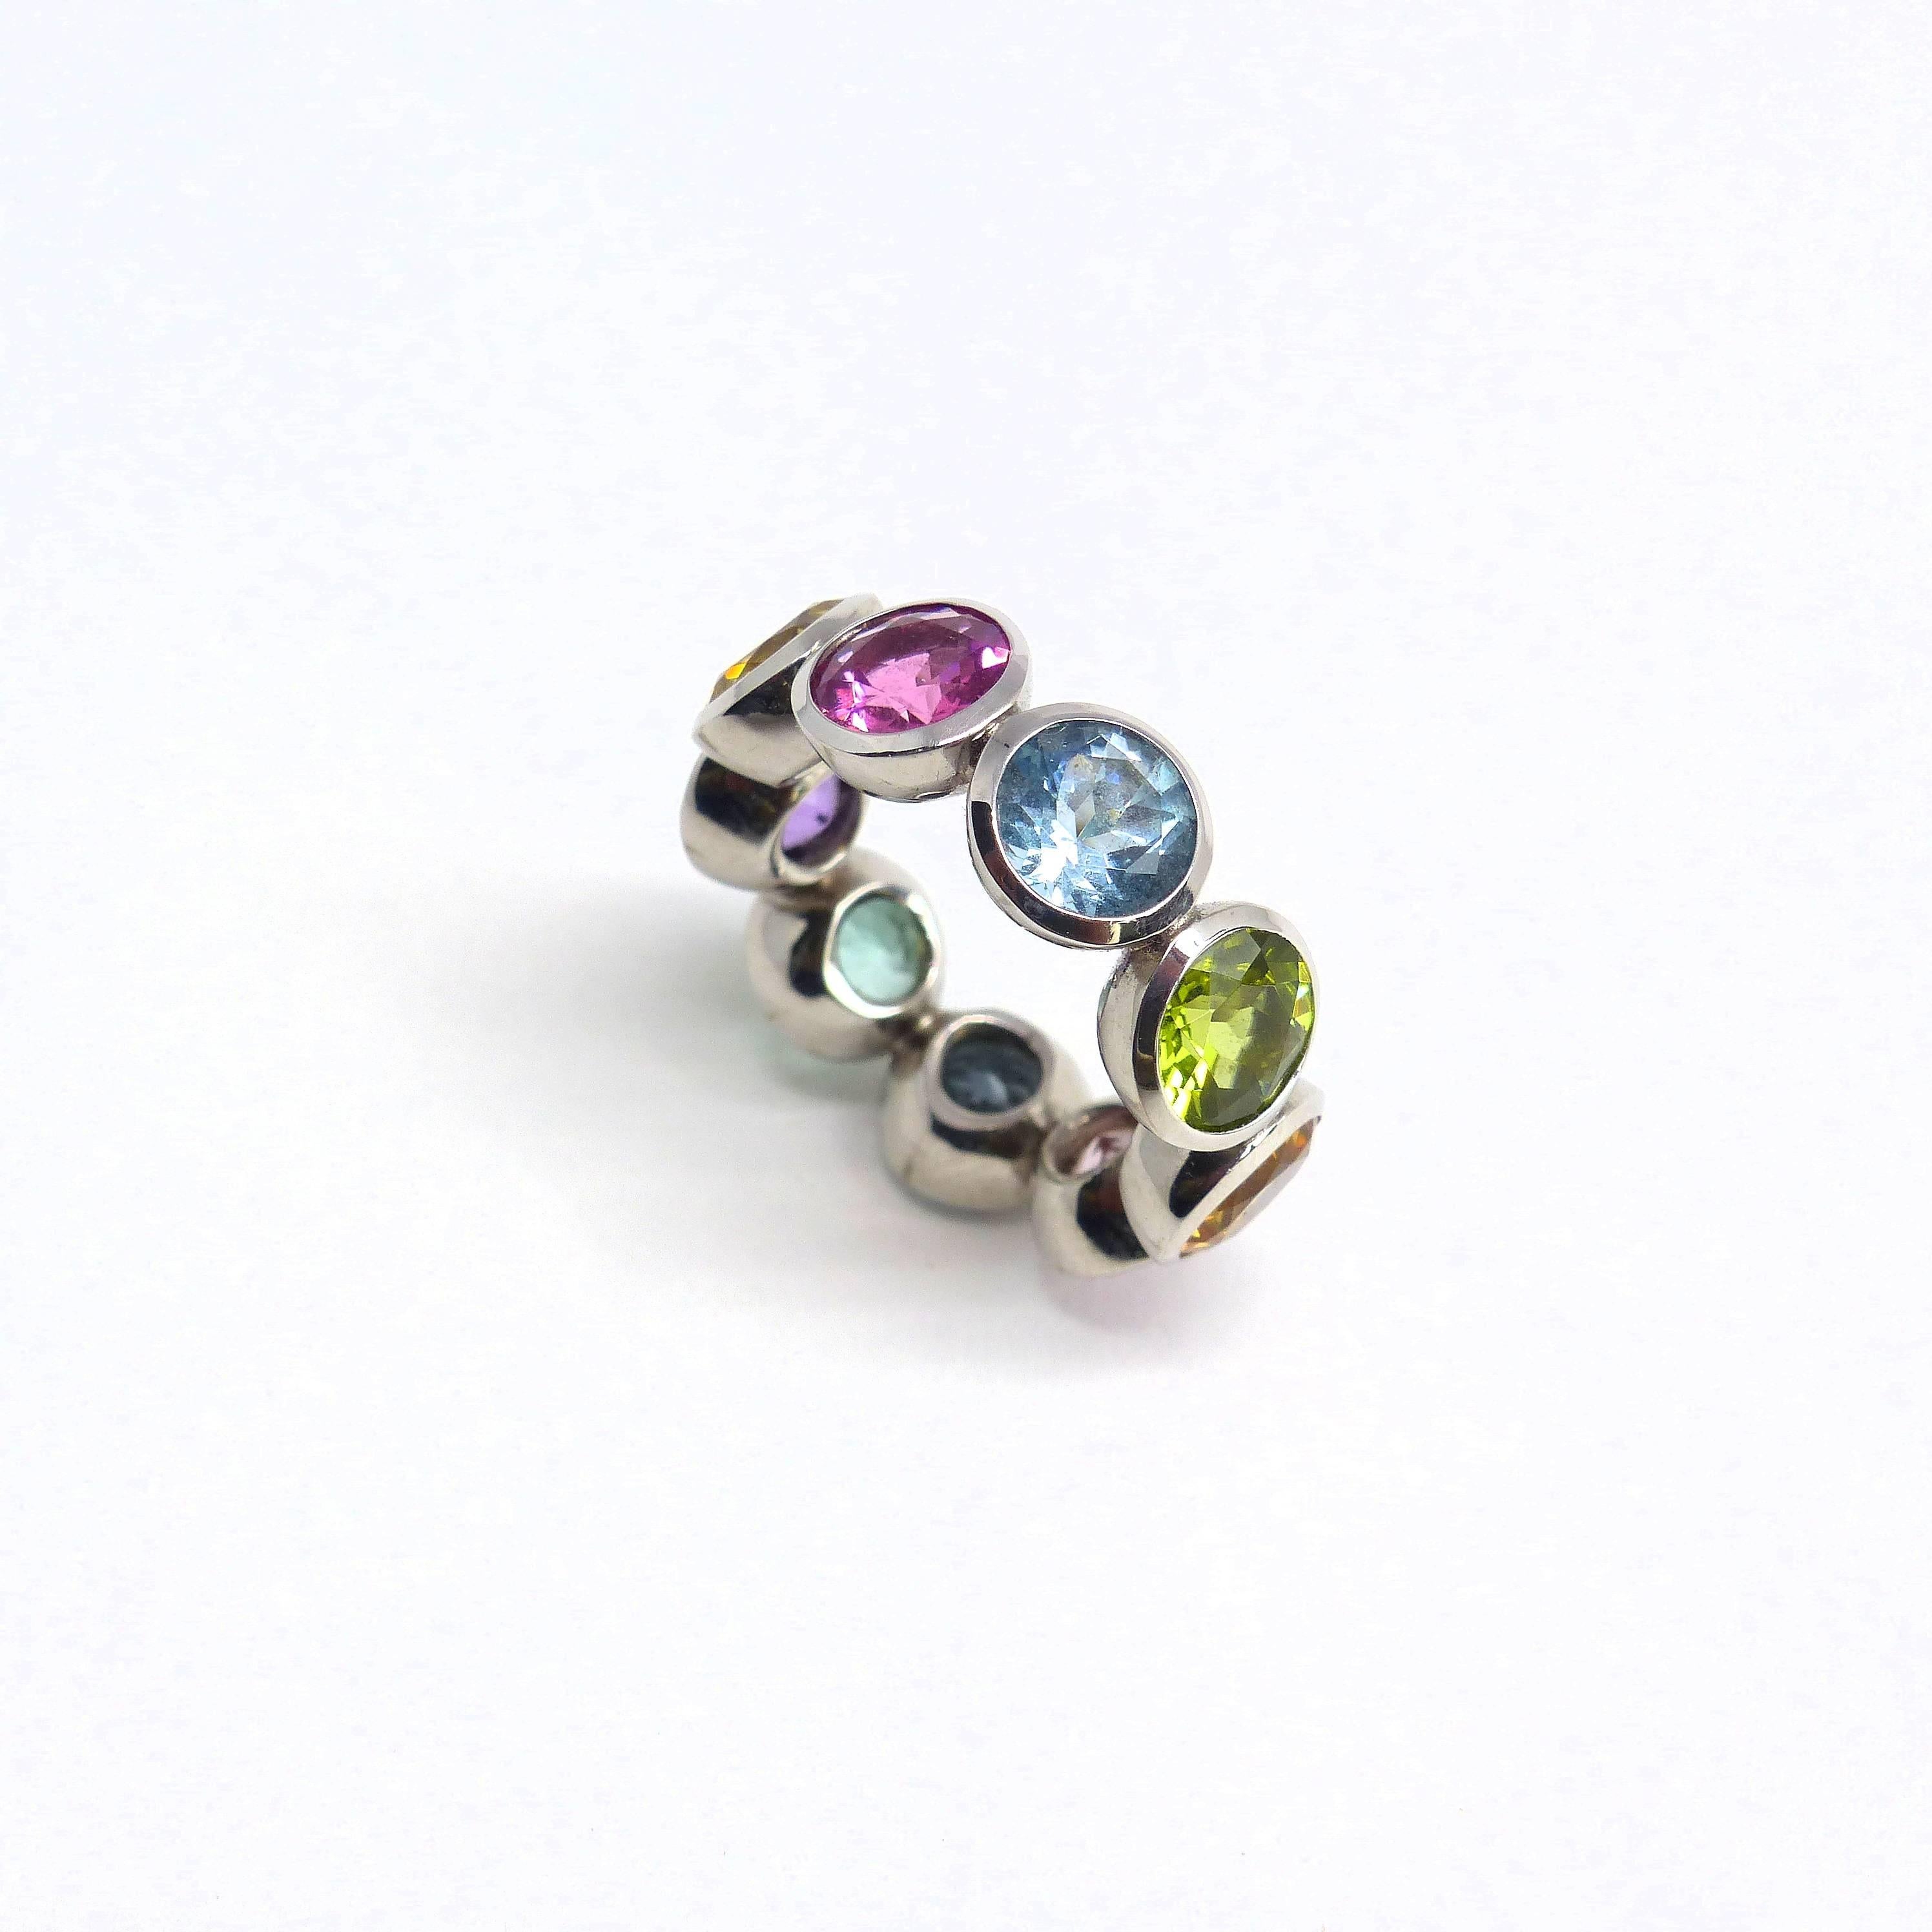 Thomas Leyser is renowned for his contemporary jewellery designs utilizing fine coloured gemstones and diamonds. 

This ring in 18k rose gold is set with 8 top quality gemstones (Aquamarine, Rubelite, Pink Tourmaline, Peridot, Green Tourmaline,